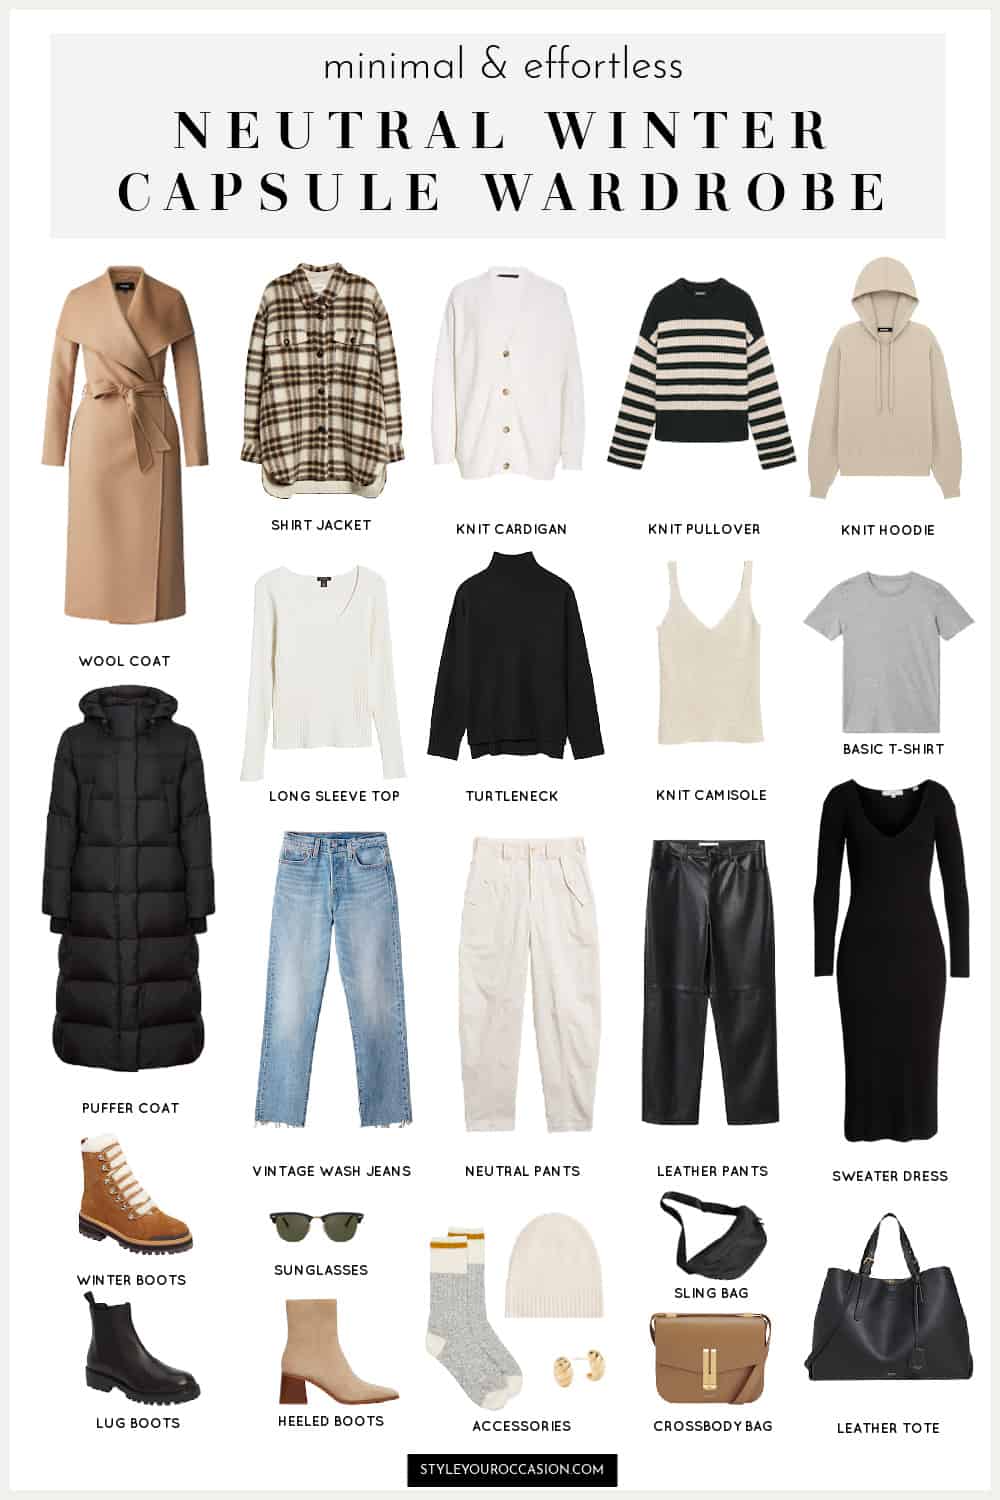 image of a winter capsule wardrobe for 2022/2023 with neutral, modern, minimalist clothing style